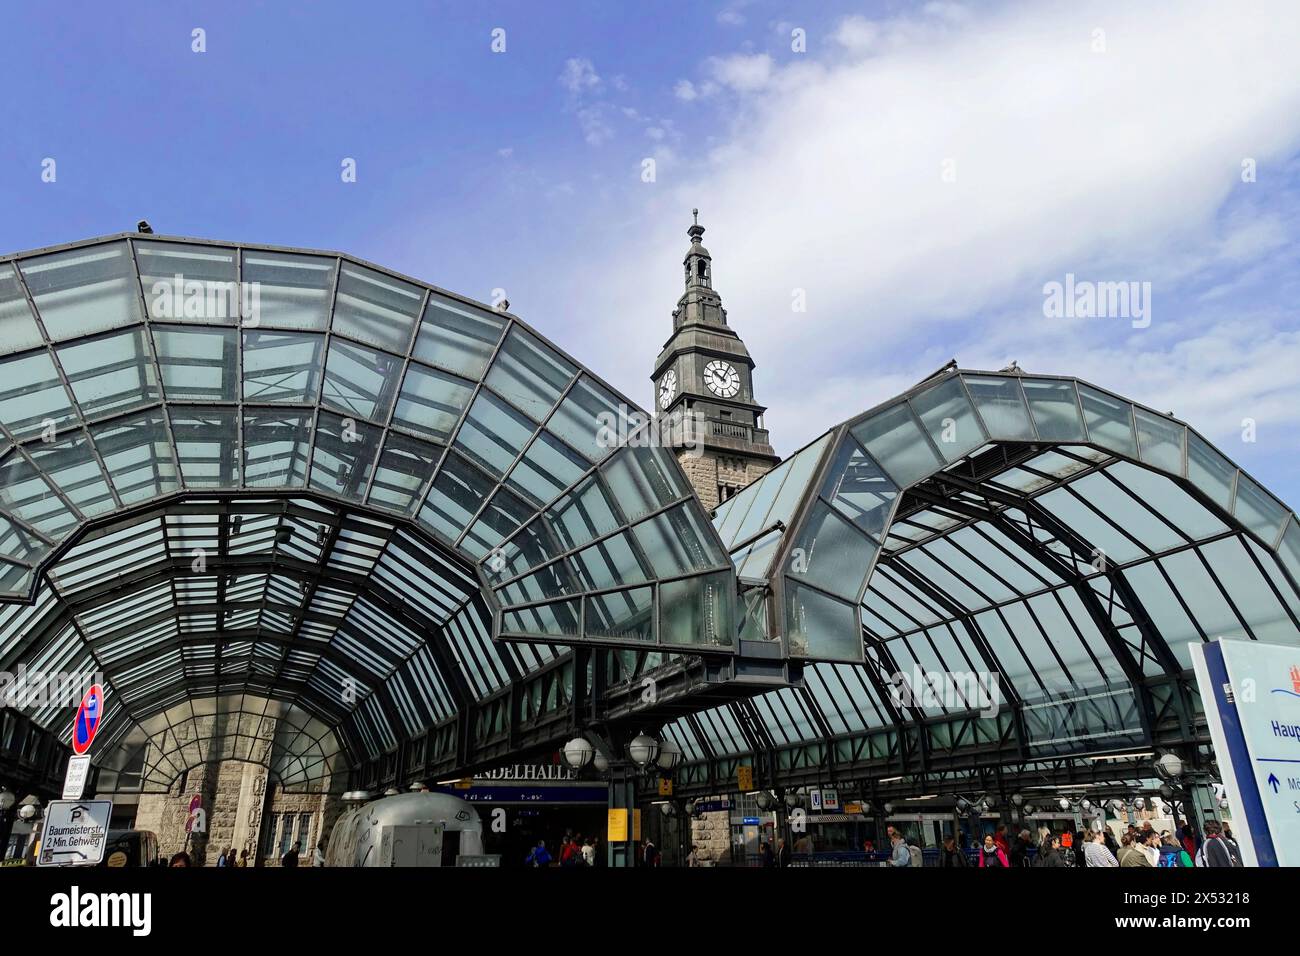 Central Station, Hamburg, Hanseatic City of Hamburg, Modern glass roof of a railway station with a historic tower in the background, Central Station Stock Photo